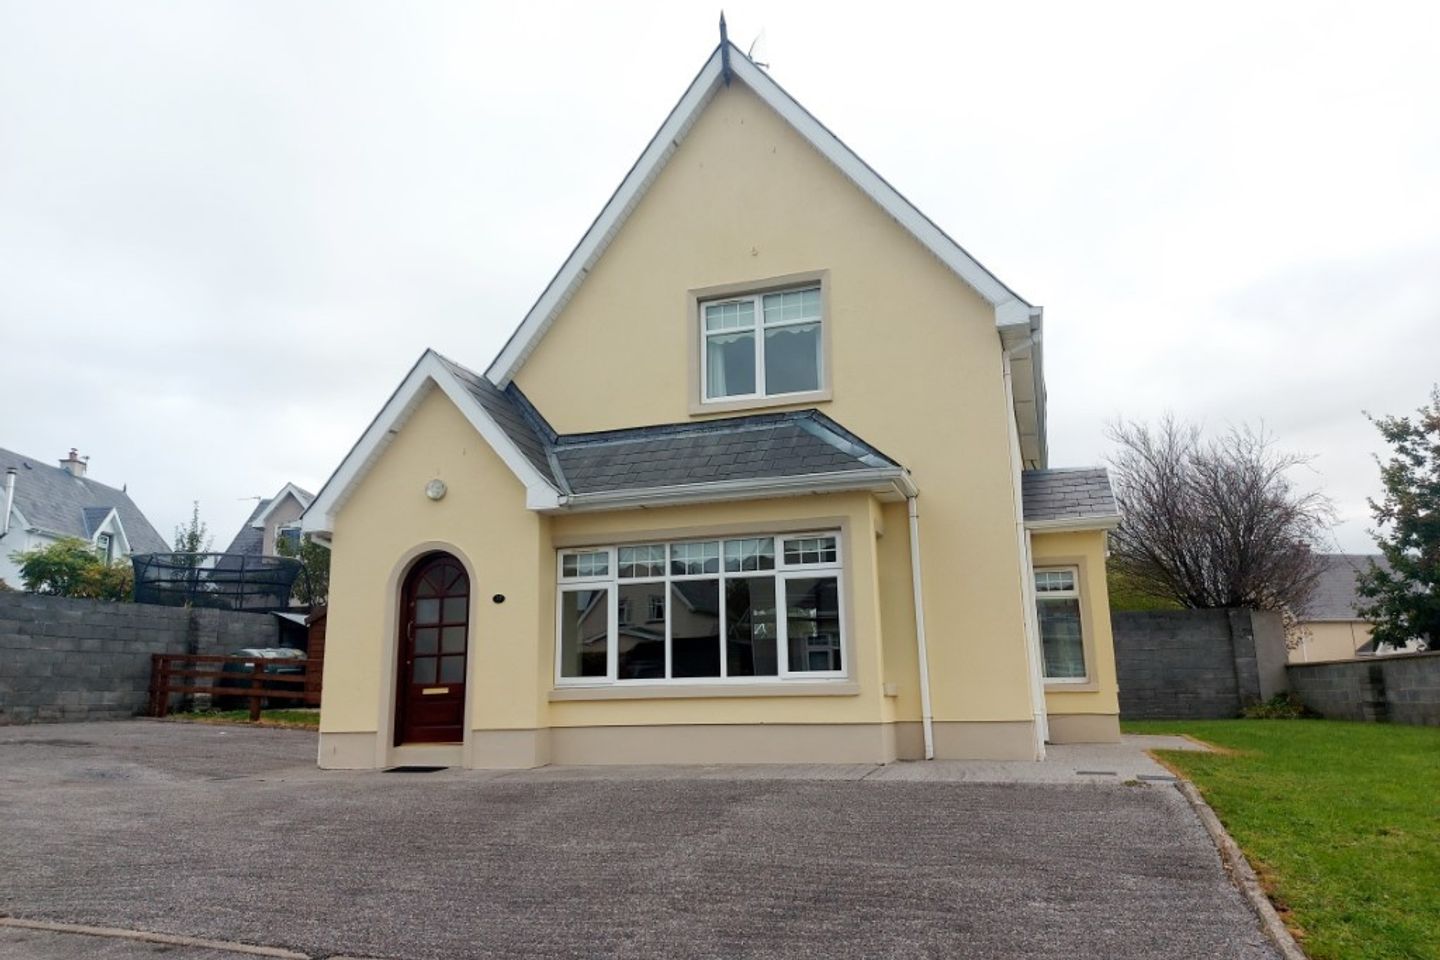 37 The Old Forge, Tulla, Co. Clare